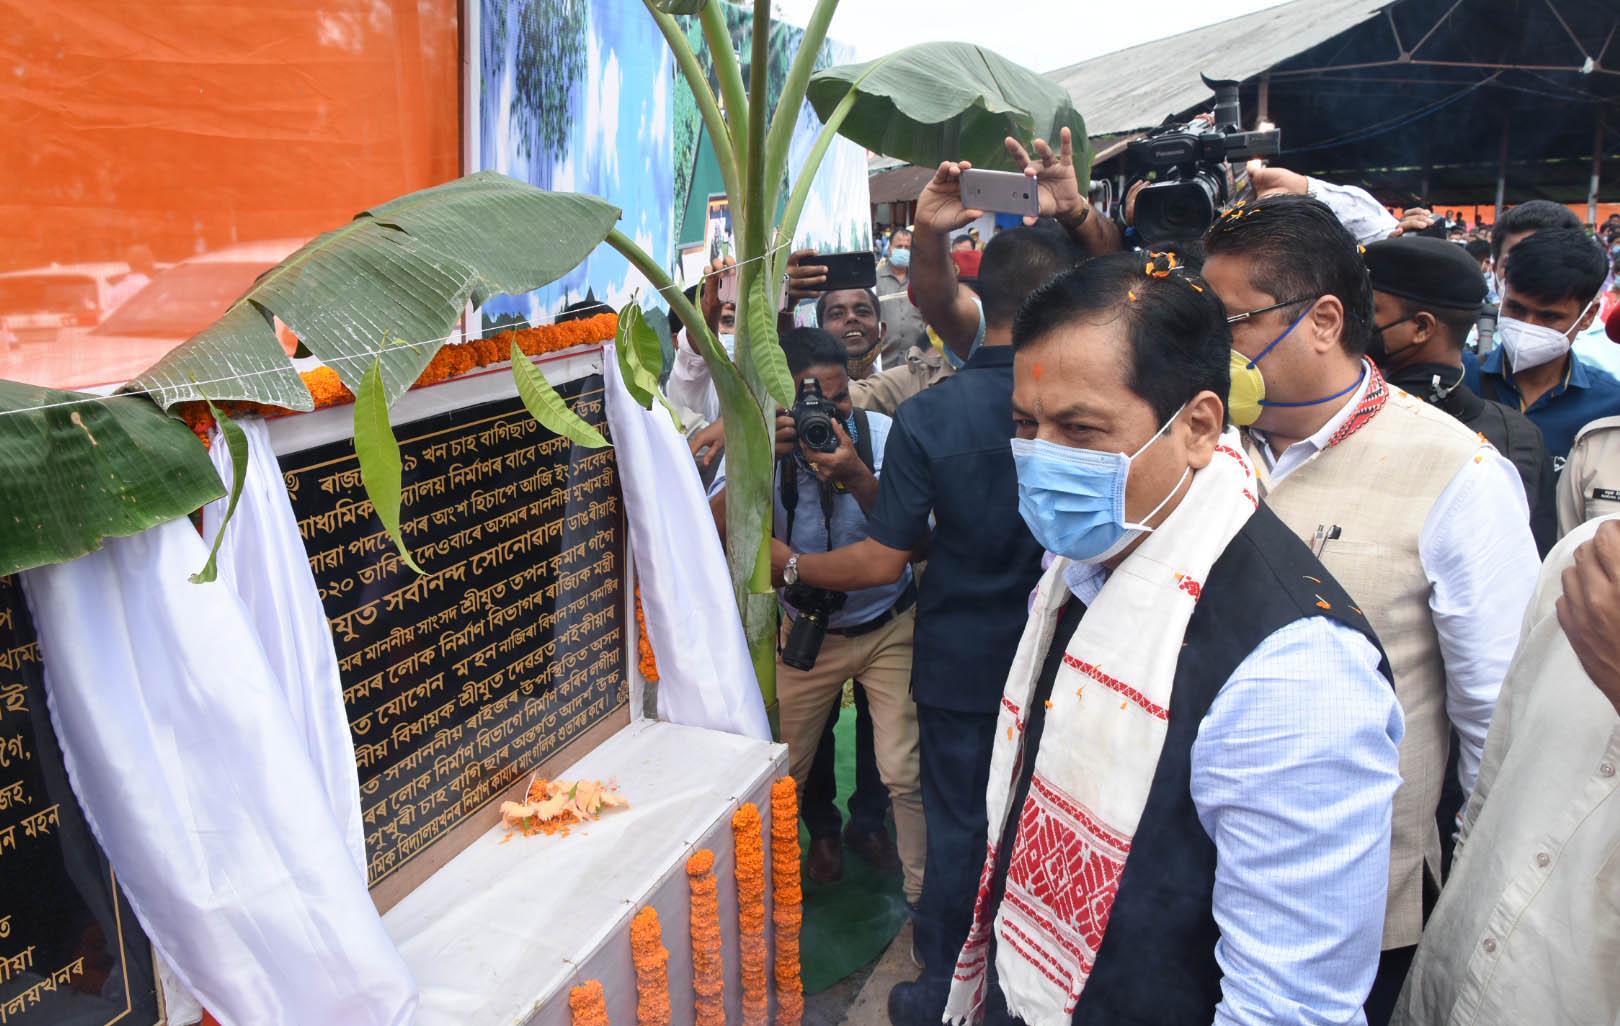 Chief Minister Sarbananda Sonowal laying the foundation stone of 119 model high schools at tea gardens in the state at a programme held at Mekipur and Bamunpukhuri Tea Gardens in Nazira on 01-11-2020. Pix by UB Photos